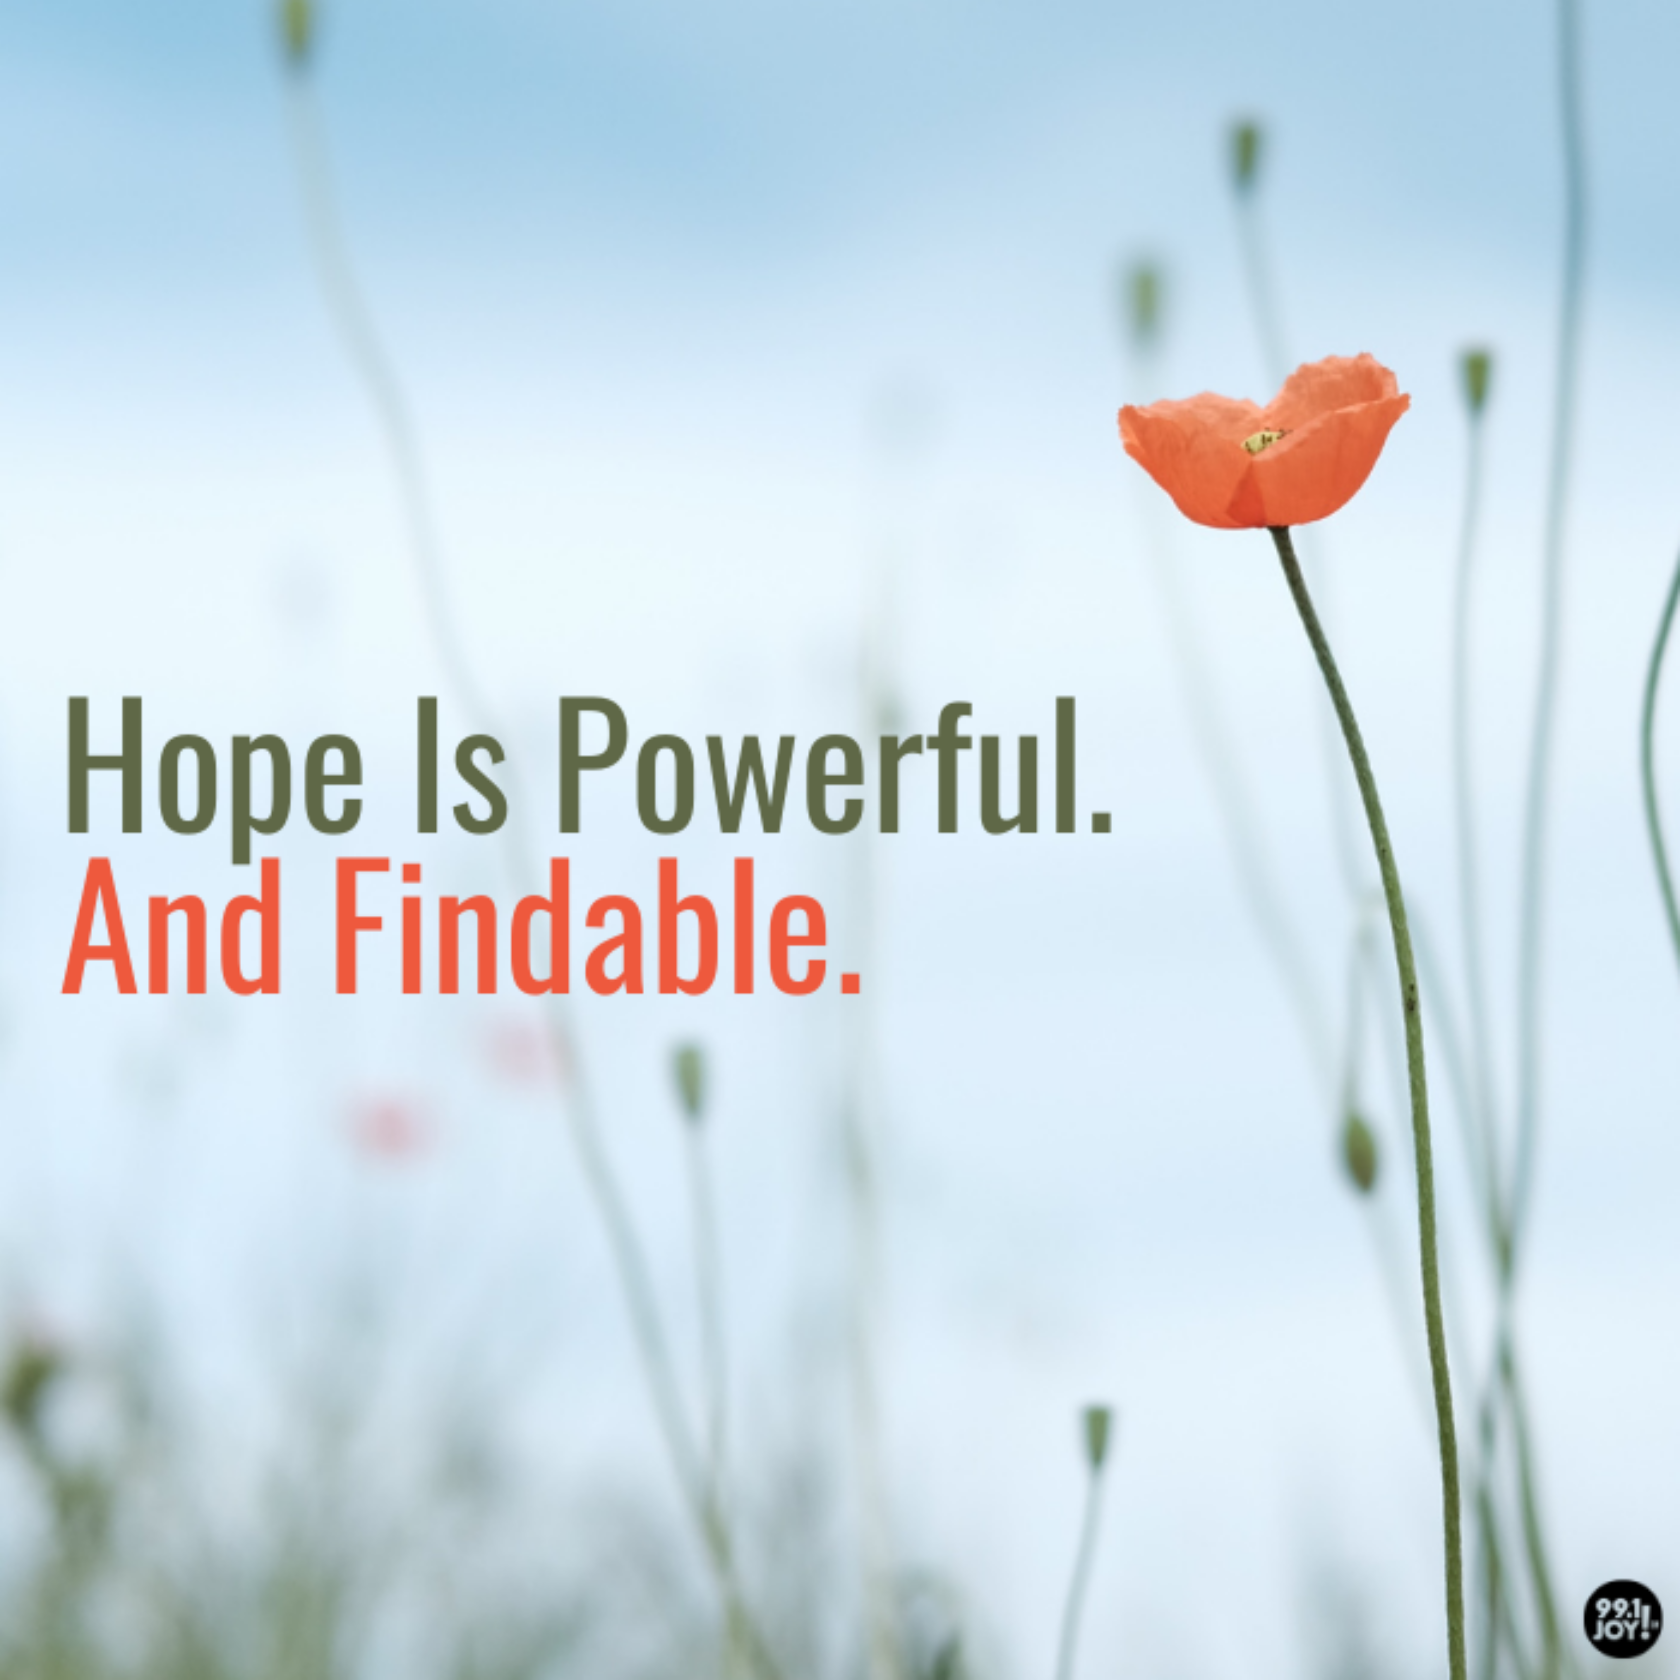 Hope Is Powerful. And Findable.